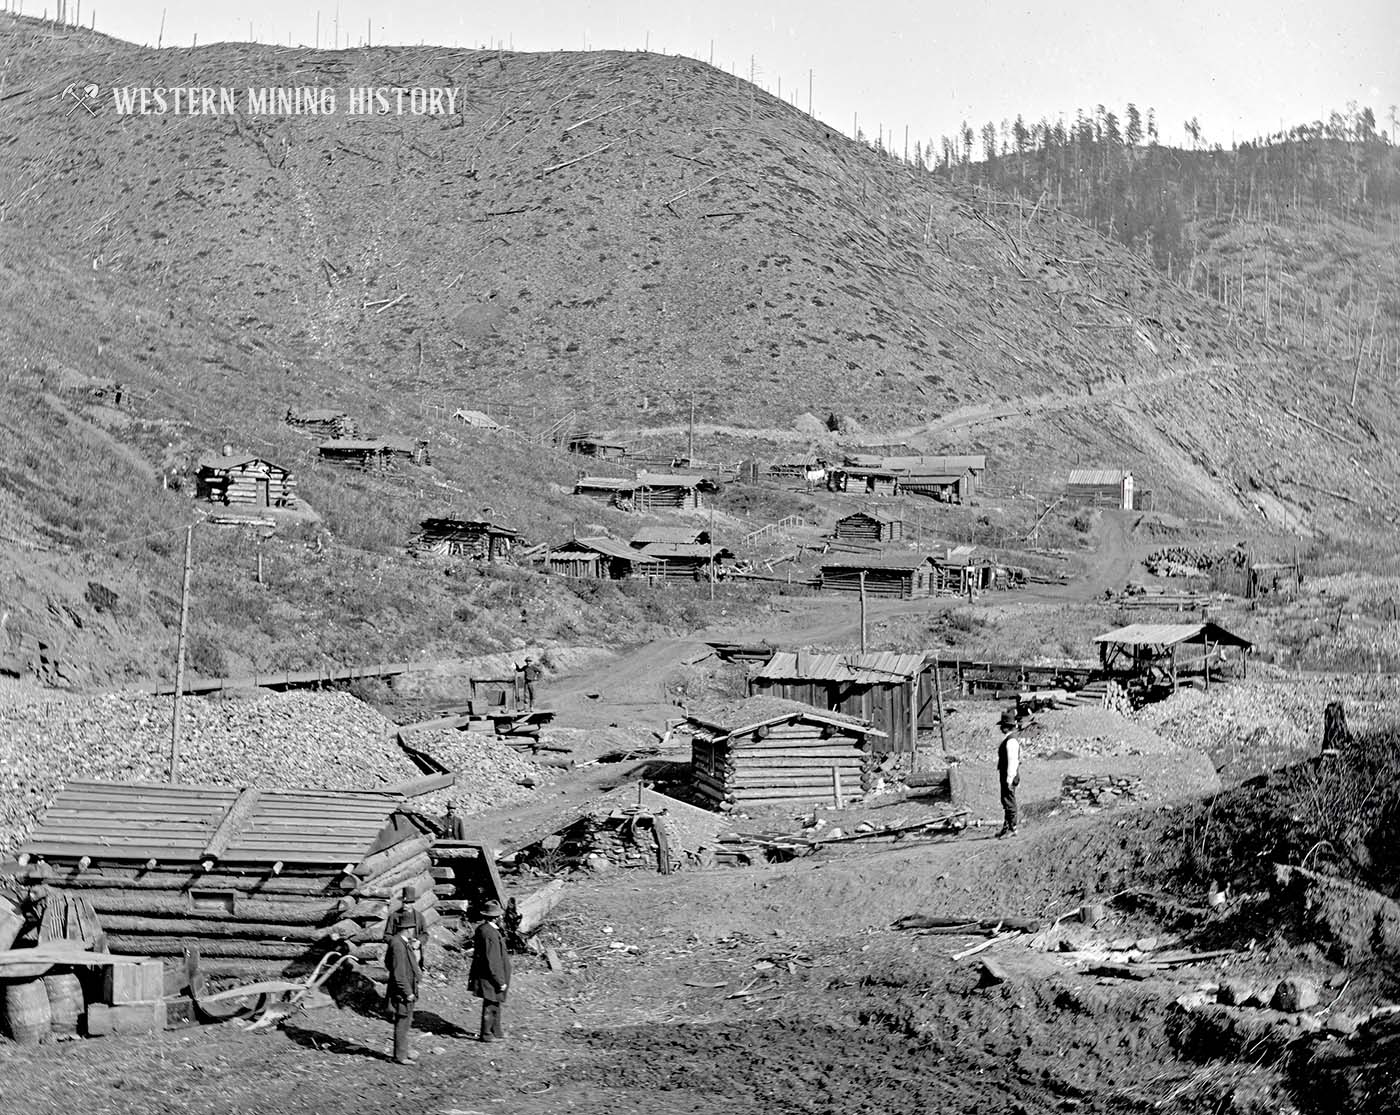 Cabins at one of the first placer mining discovery sites near Deadwood 1877